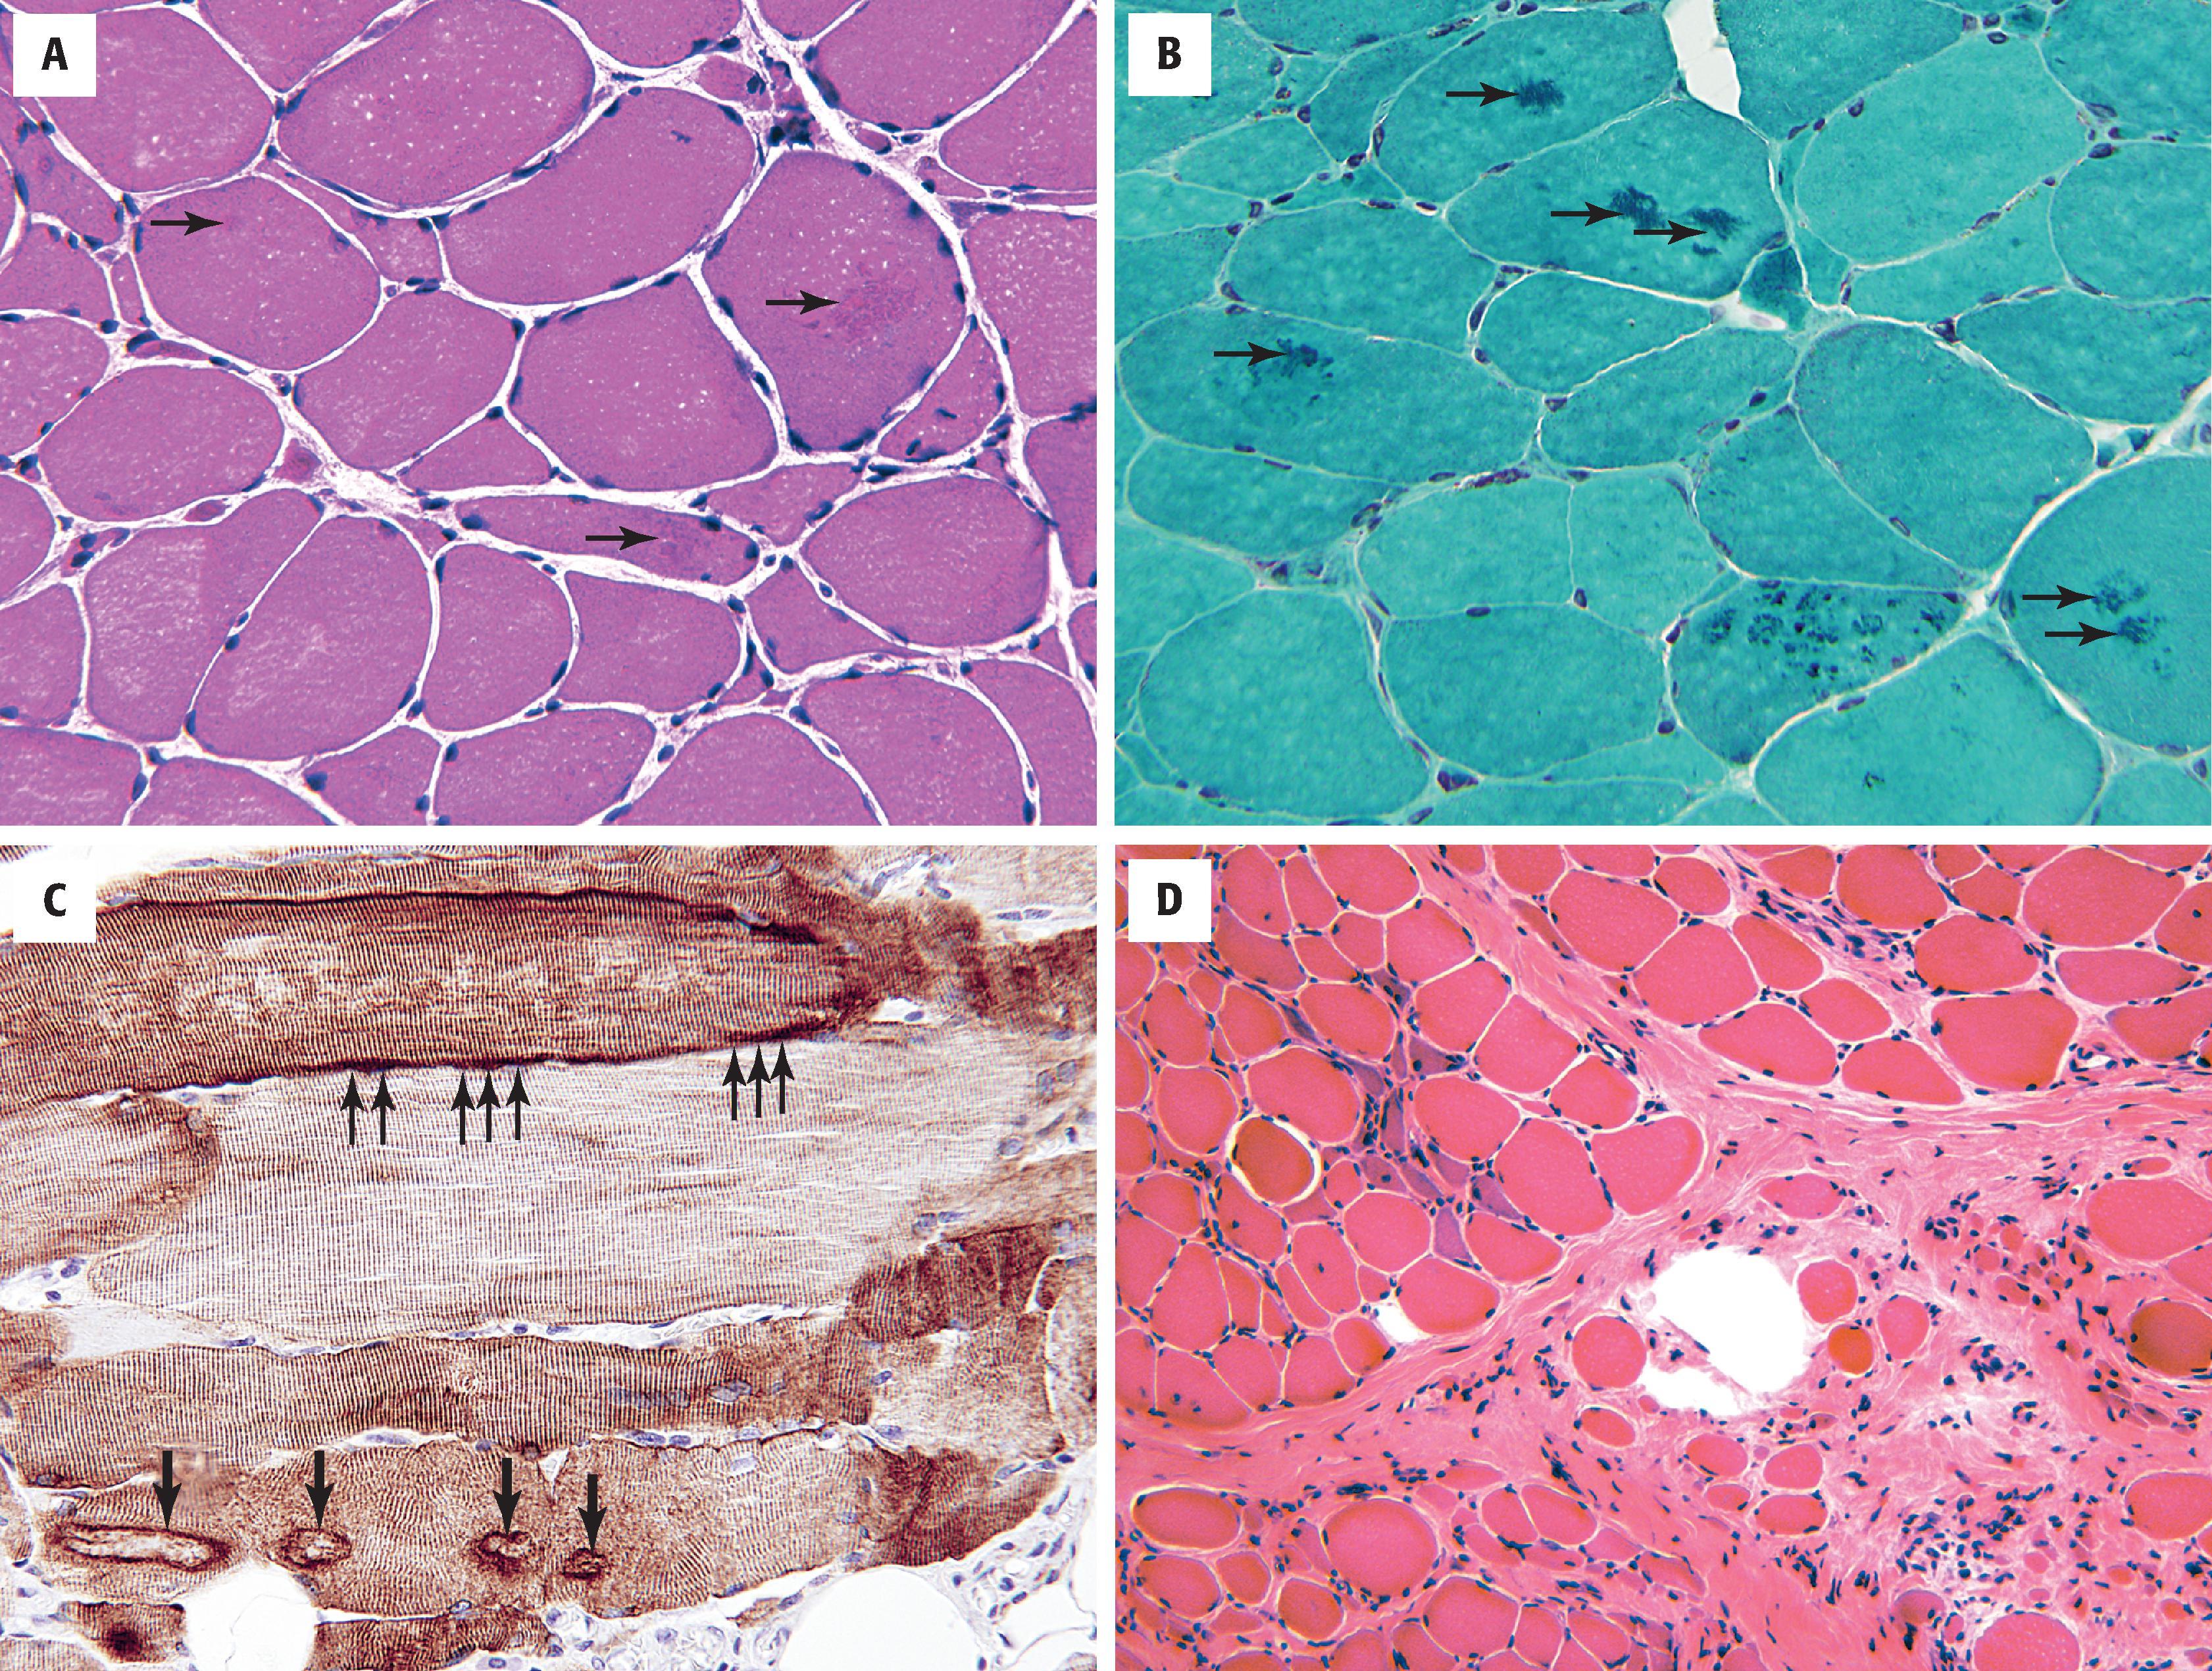 Figure 11.4, A , Similar to late-onset myofibrillar myopathies, desminopathies show myopathic features accompanied by a variety of cytoplasmic aggregates ( arrows ). B , A variety of sarcoplasmic inclusions may be seen on trichrome staining. These are often bluish-green and may be discrete or more rarefied ( arrows ). C , Desmin immunohistochemical staining shows both discrete intracytoplasmic inclusions ( lower arrows ) and more diffuse plaque-like subsarcolemmal aggregates ( upper arrows ). D , Classically, muscular dystrophies demonstrate myopathic features accompanied by prominent endomysial and perimysial fibrosis.